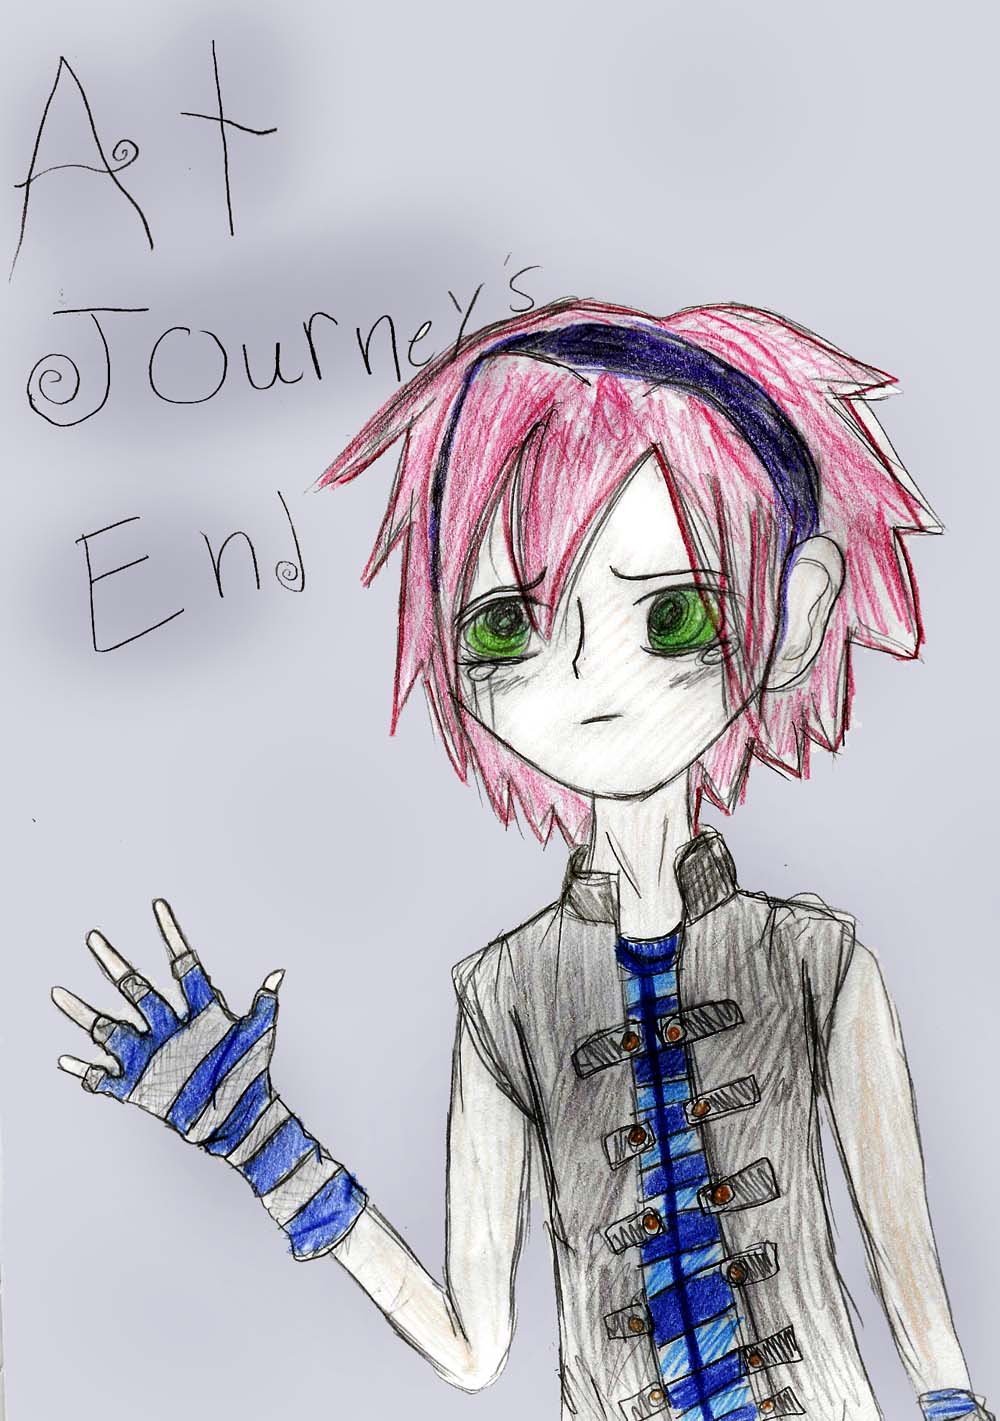 "At Journey's End..." by Raining_Tears